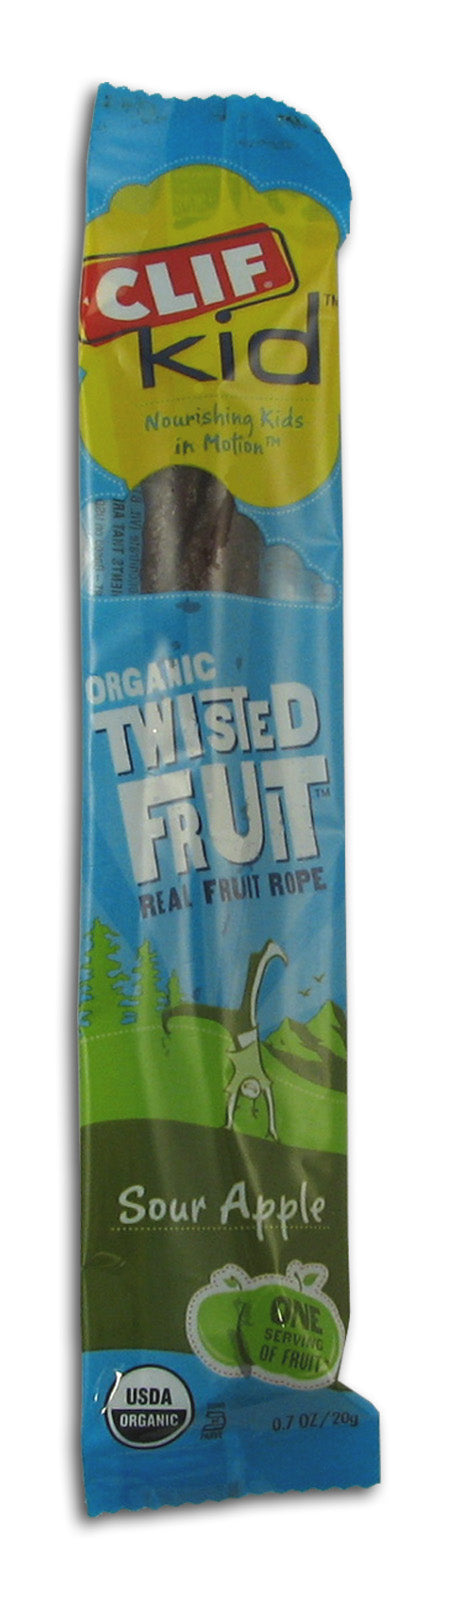 Twisted Fruit, Sour Apple, Organic